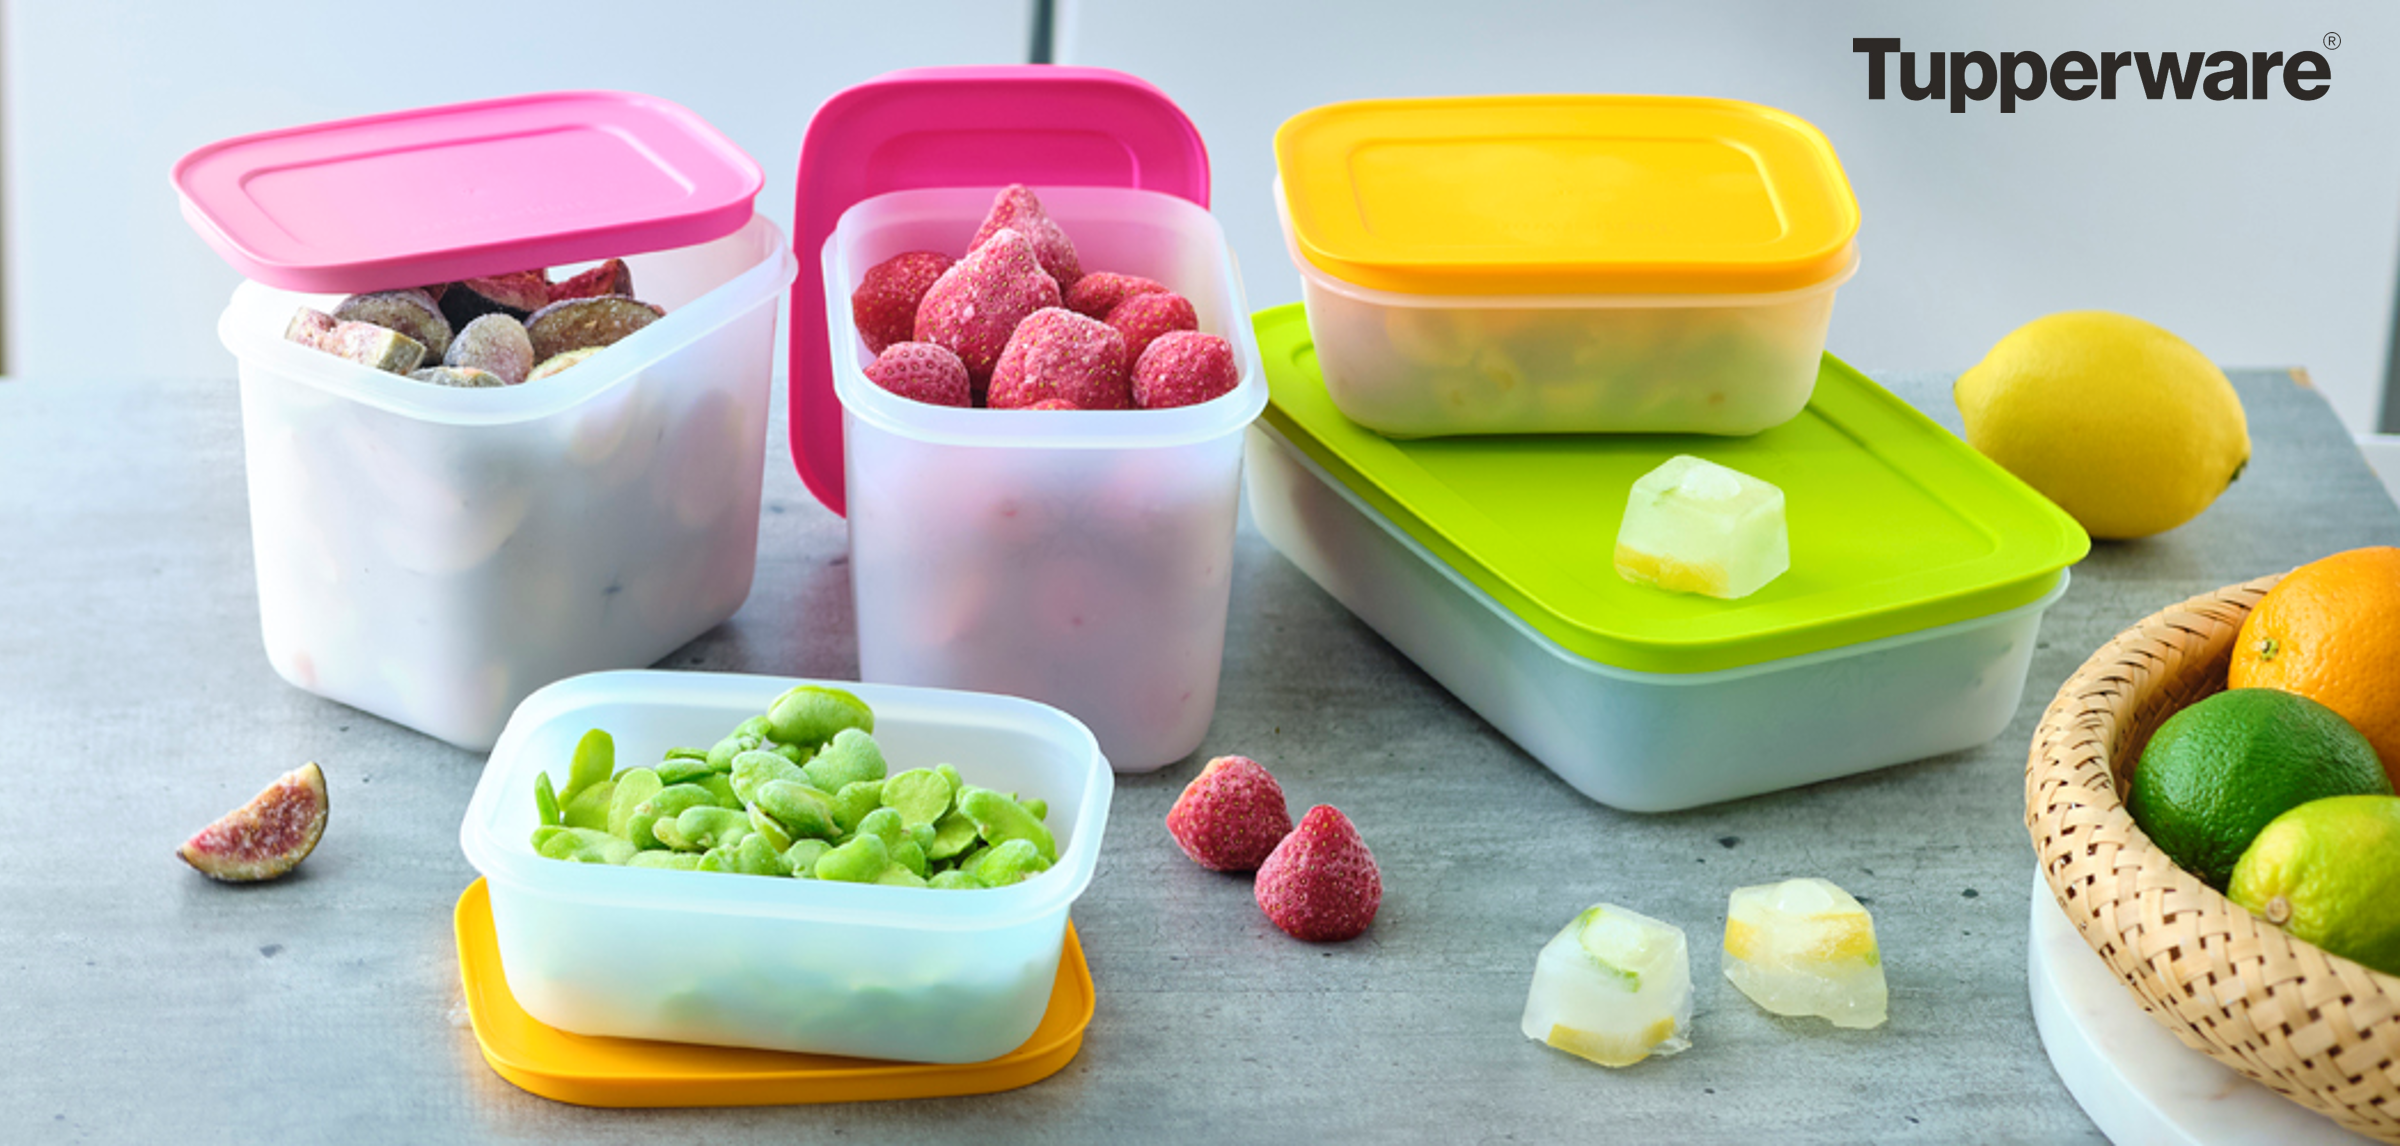 Tupperware launches in UK retail for time - Business & Industry | News | Analysis | Magazines- Asian Trader